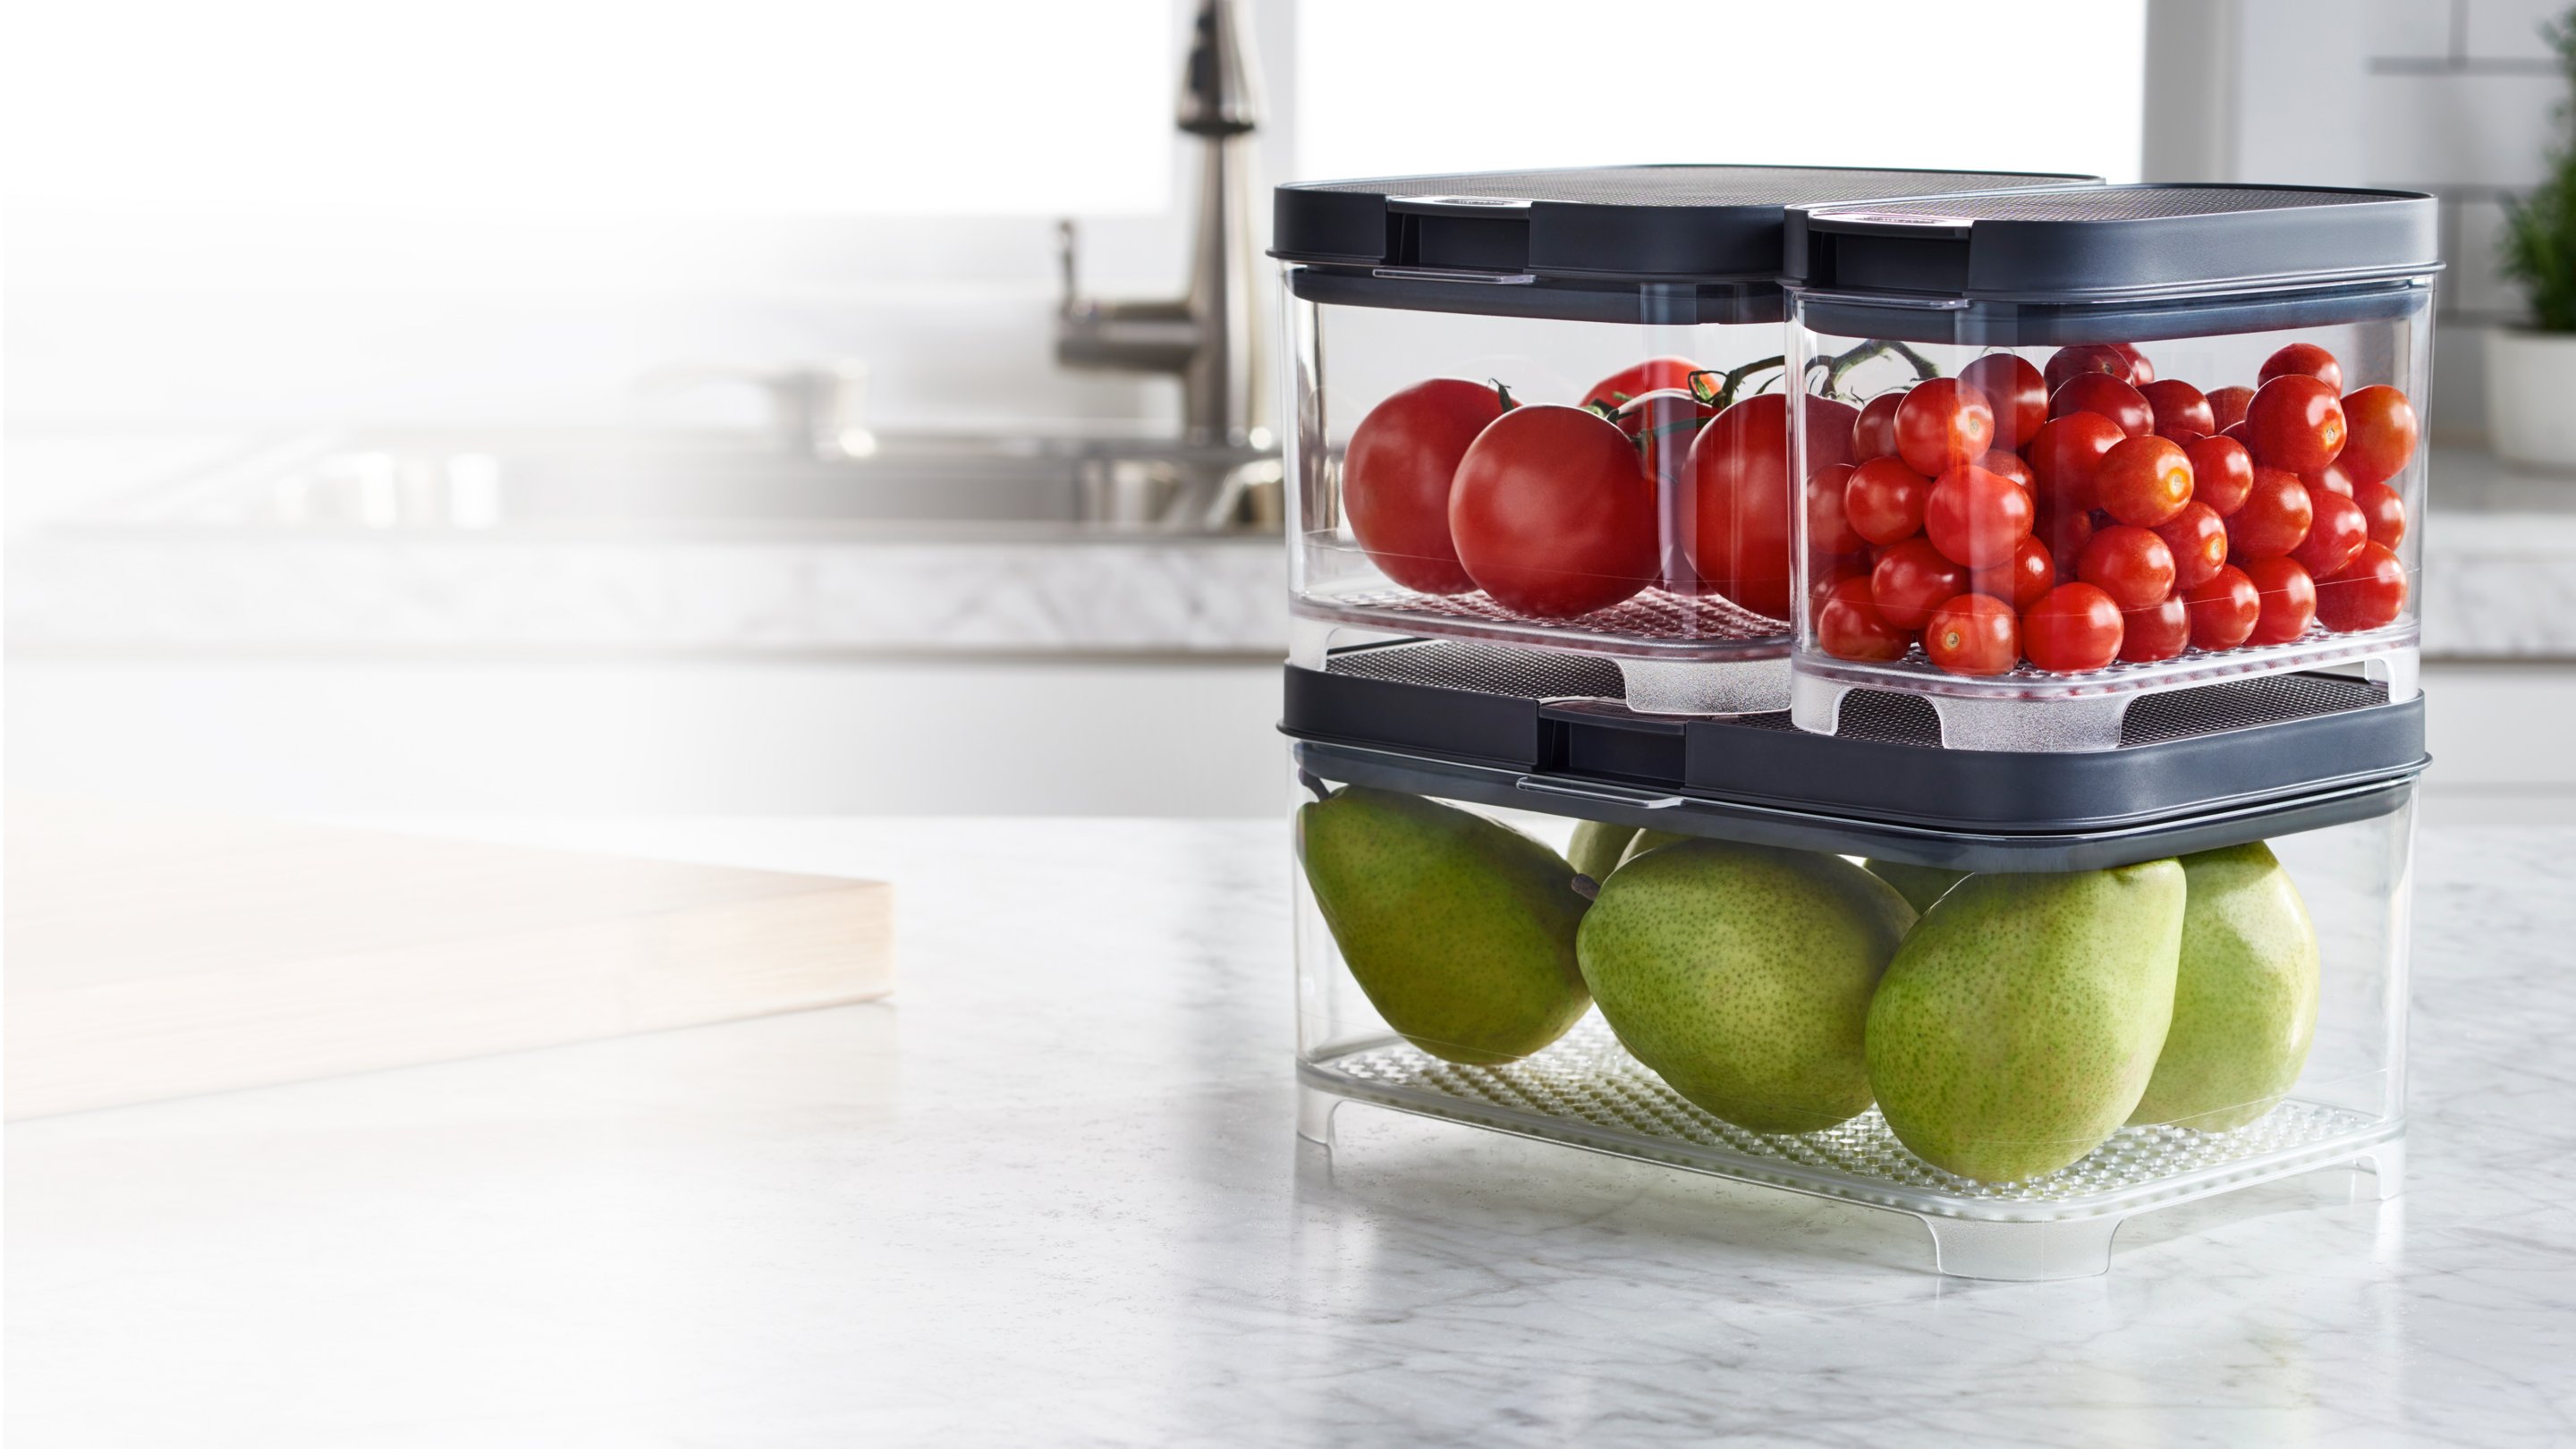 Rubbermaid FreshWorks countertop produce storage containers stacked